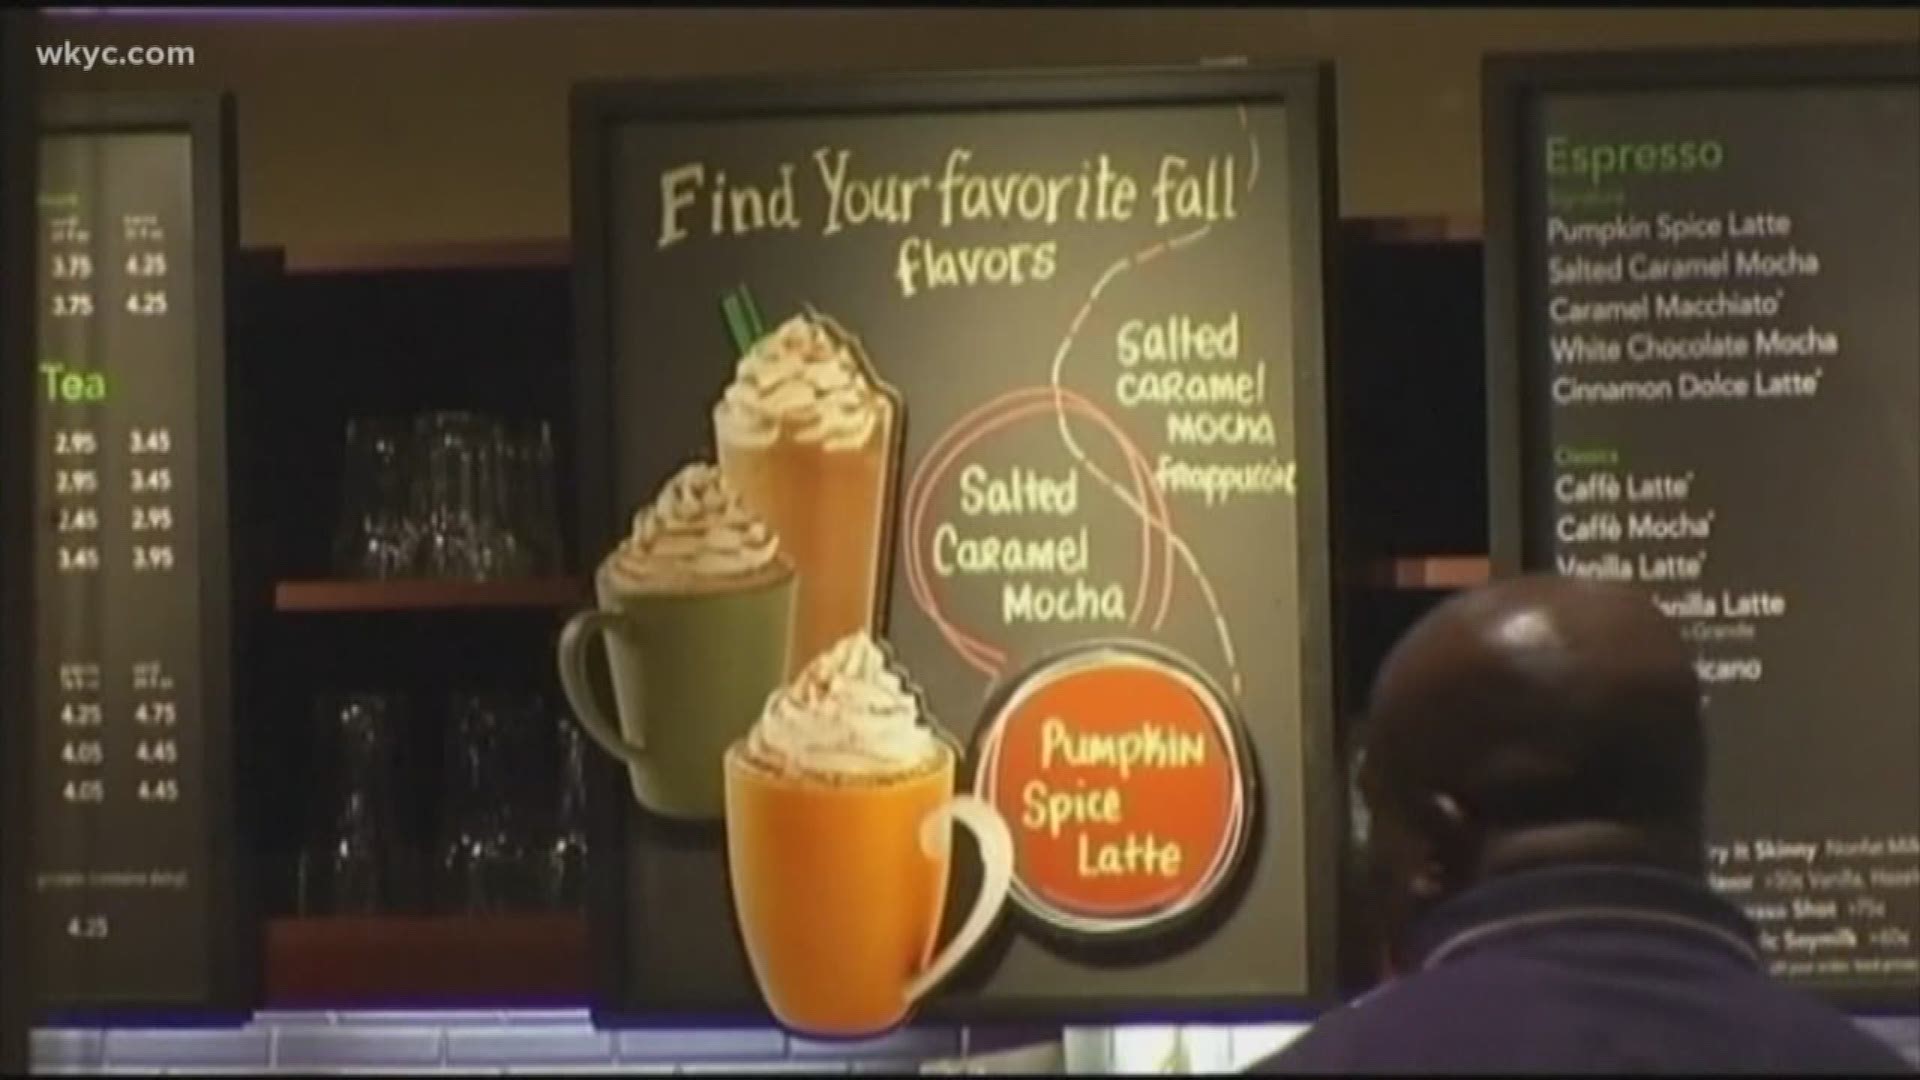 Aug. 28, 2018: We may still be in the heat of summer, but Starbucks is already in the fall spirit.